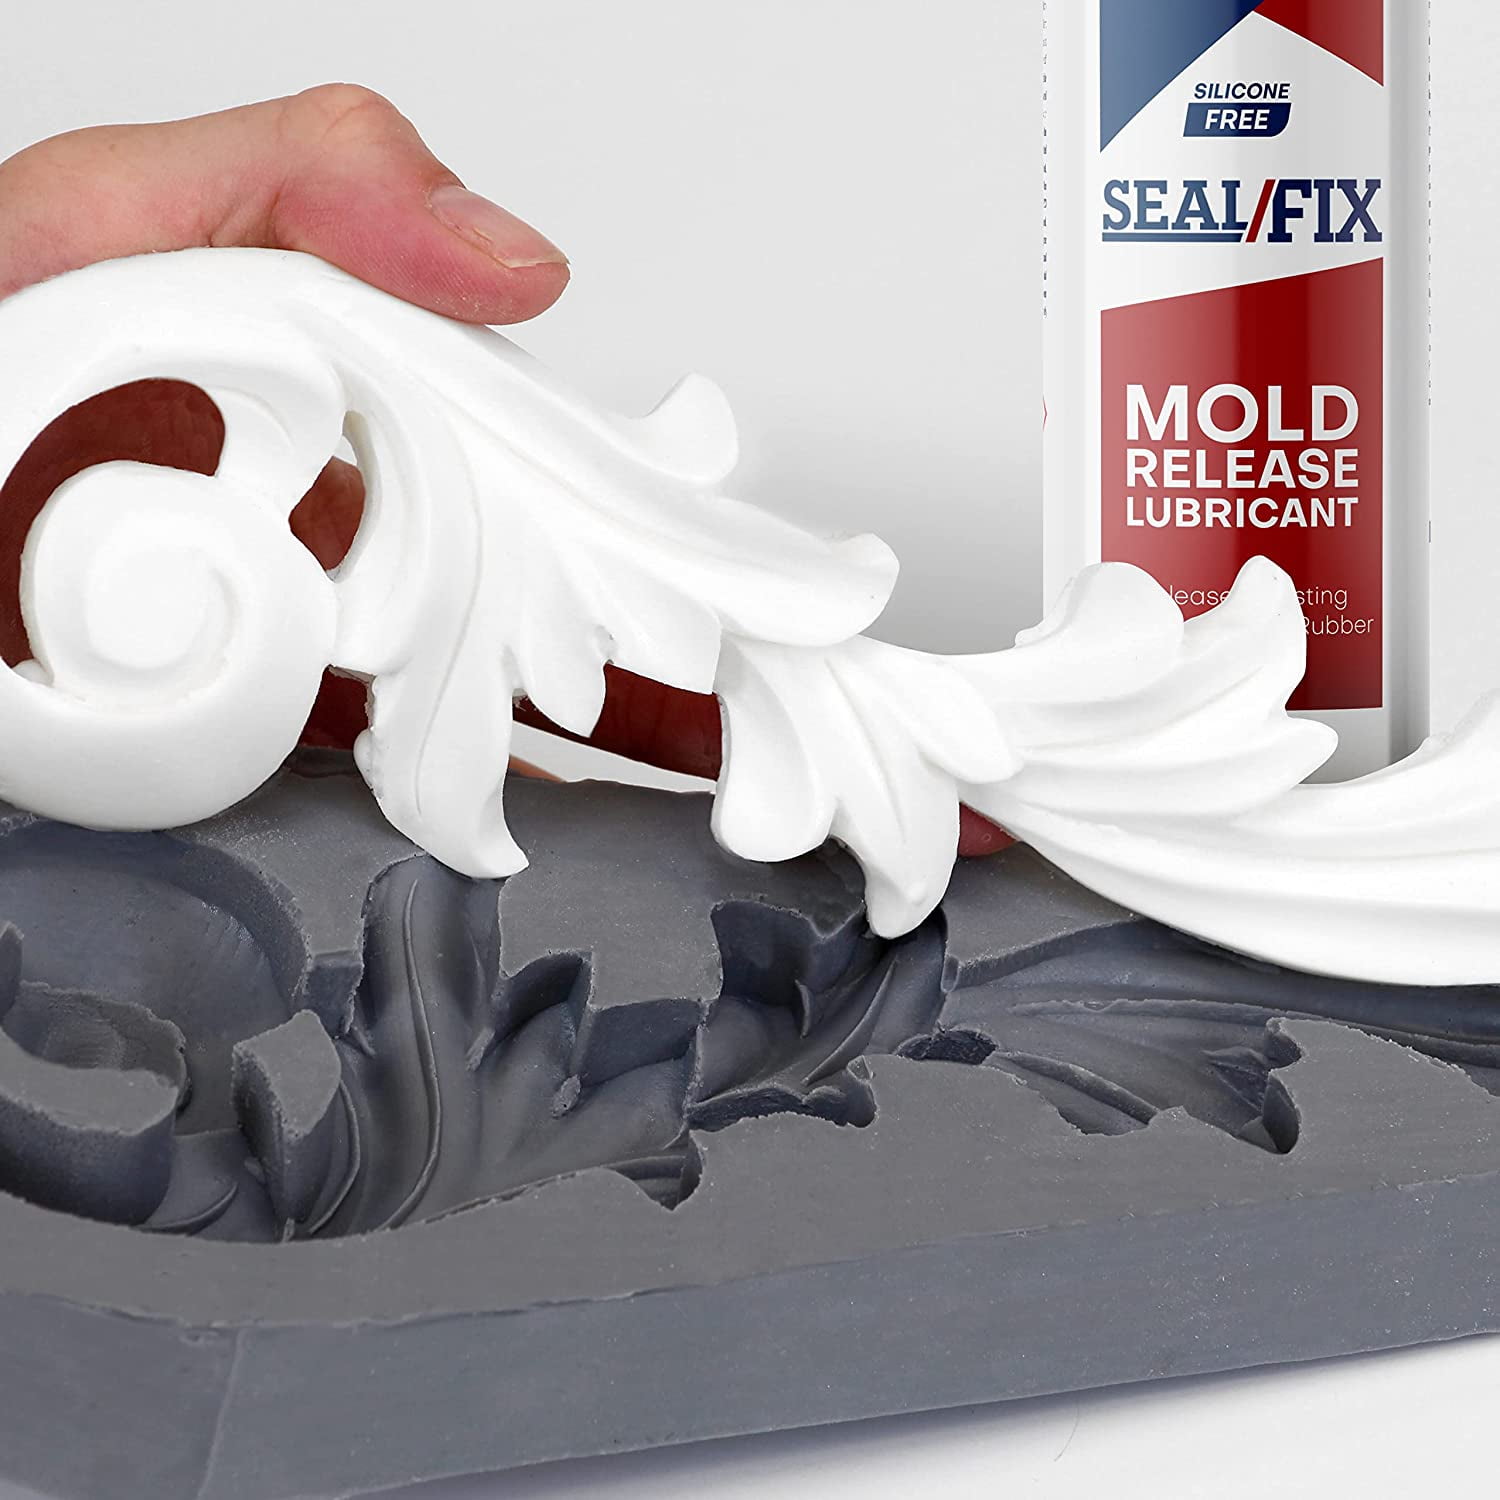 CRC Silicone Mold Release, 11.5 Wt Oz, Non-Staining, Non-Corrosive, and  Fast-Drying, 3.5% Silicone, Easy Part Removal from Molds, Aerosol Spray:  Power Tool Lubricants: : Industrial & Scientific